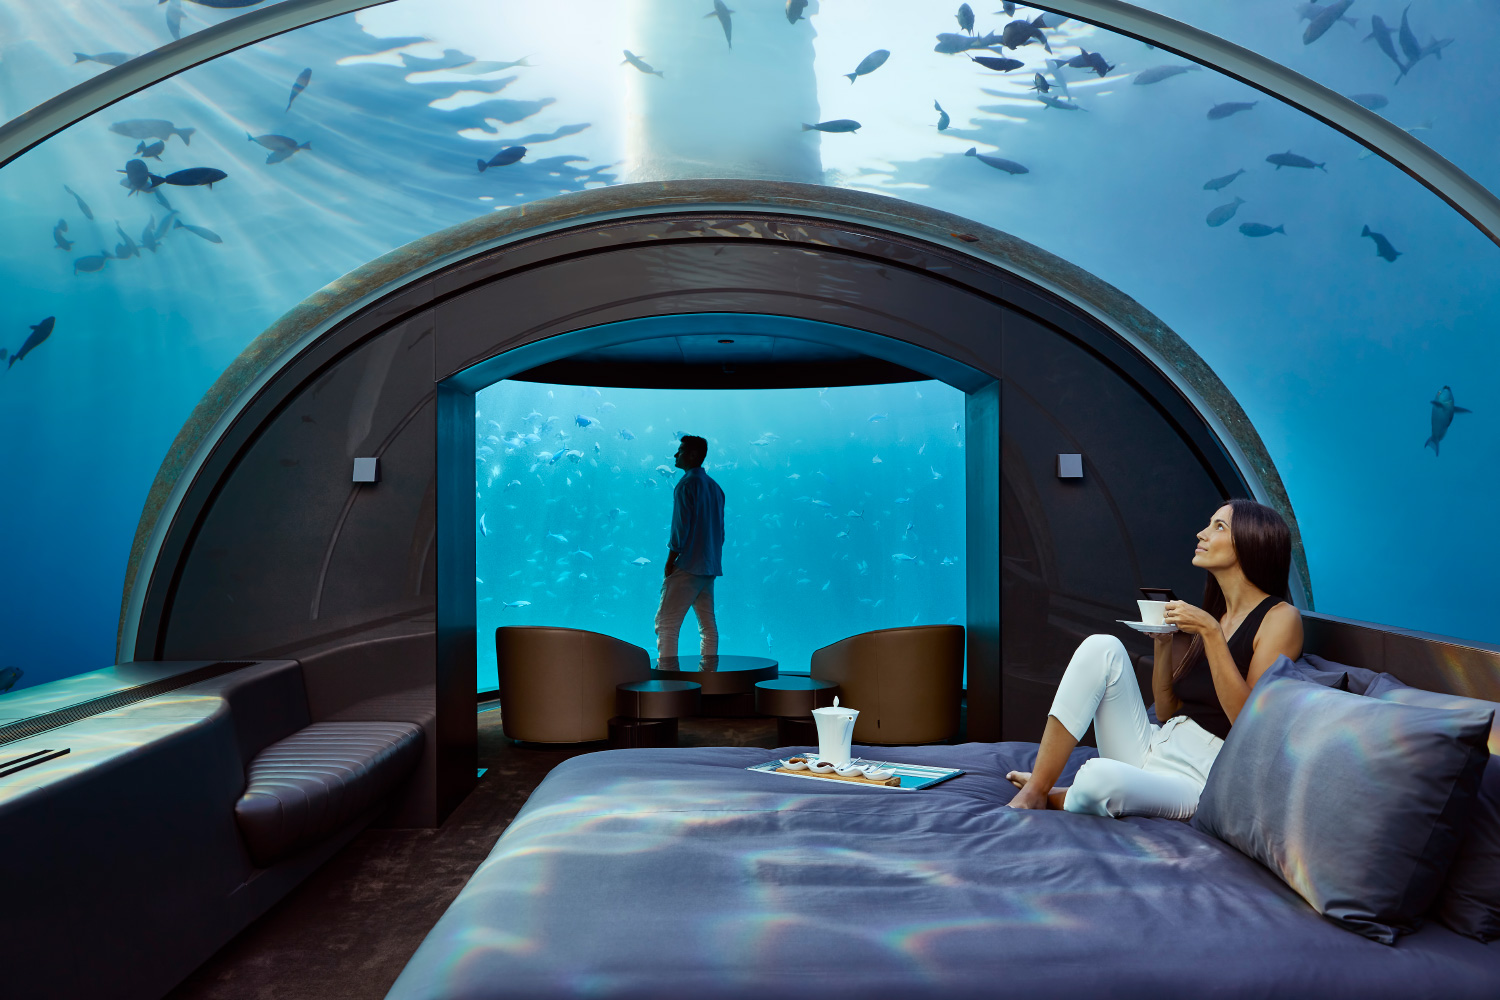 Take a deep dive into the world's first underwater hotel